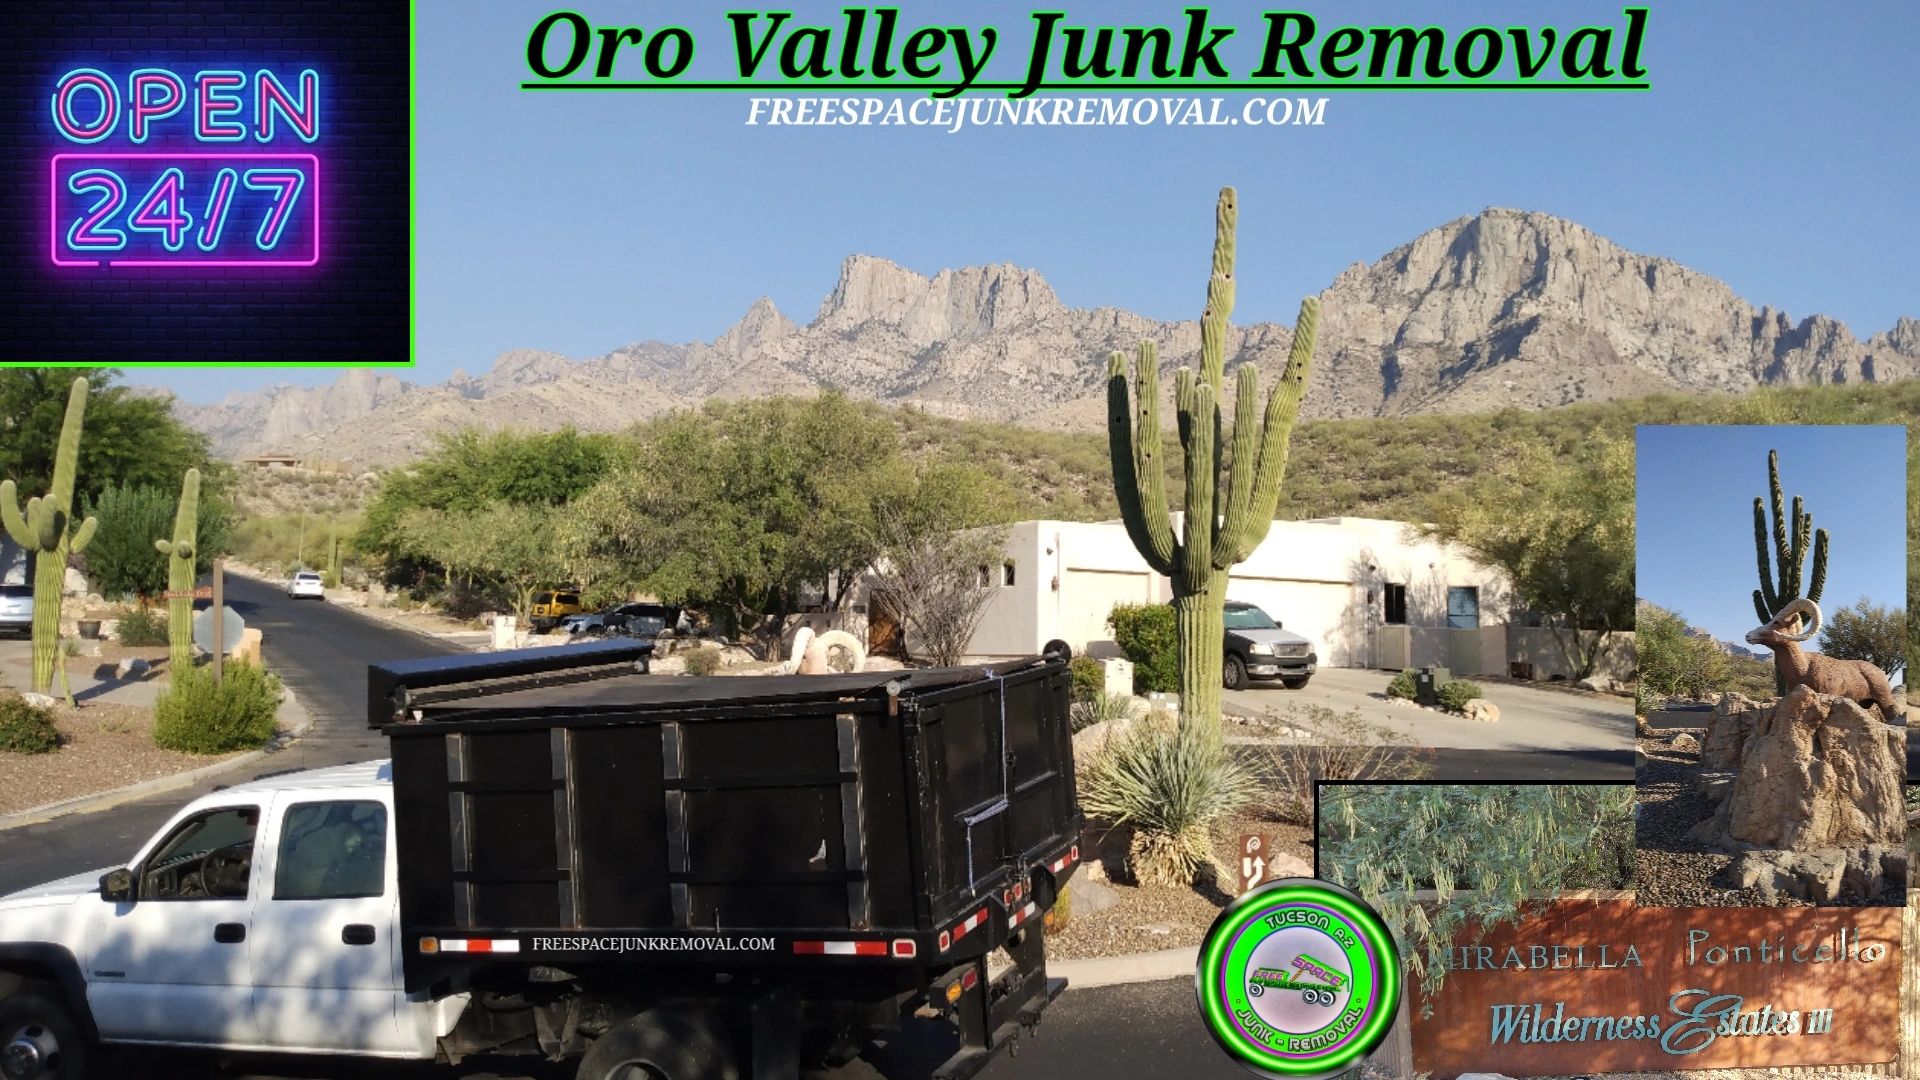 Curbside Oro Valley Junk Removal by Freespace Junk Removal Tucson 85737 zip code